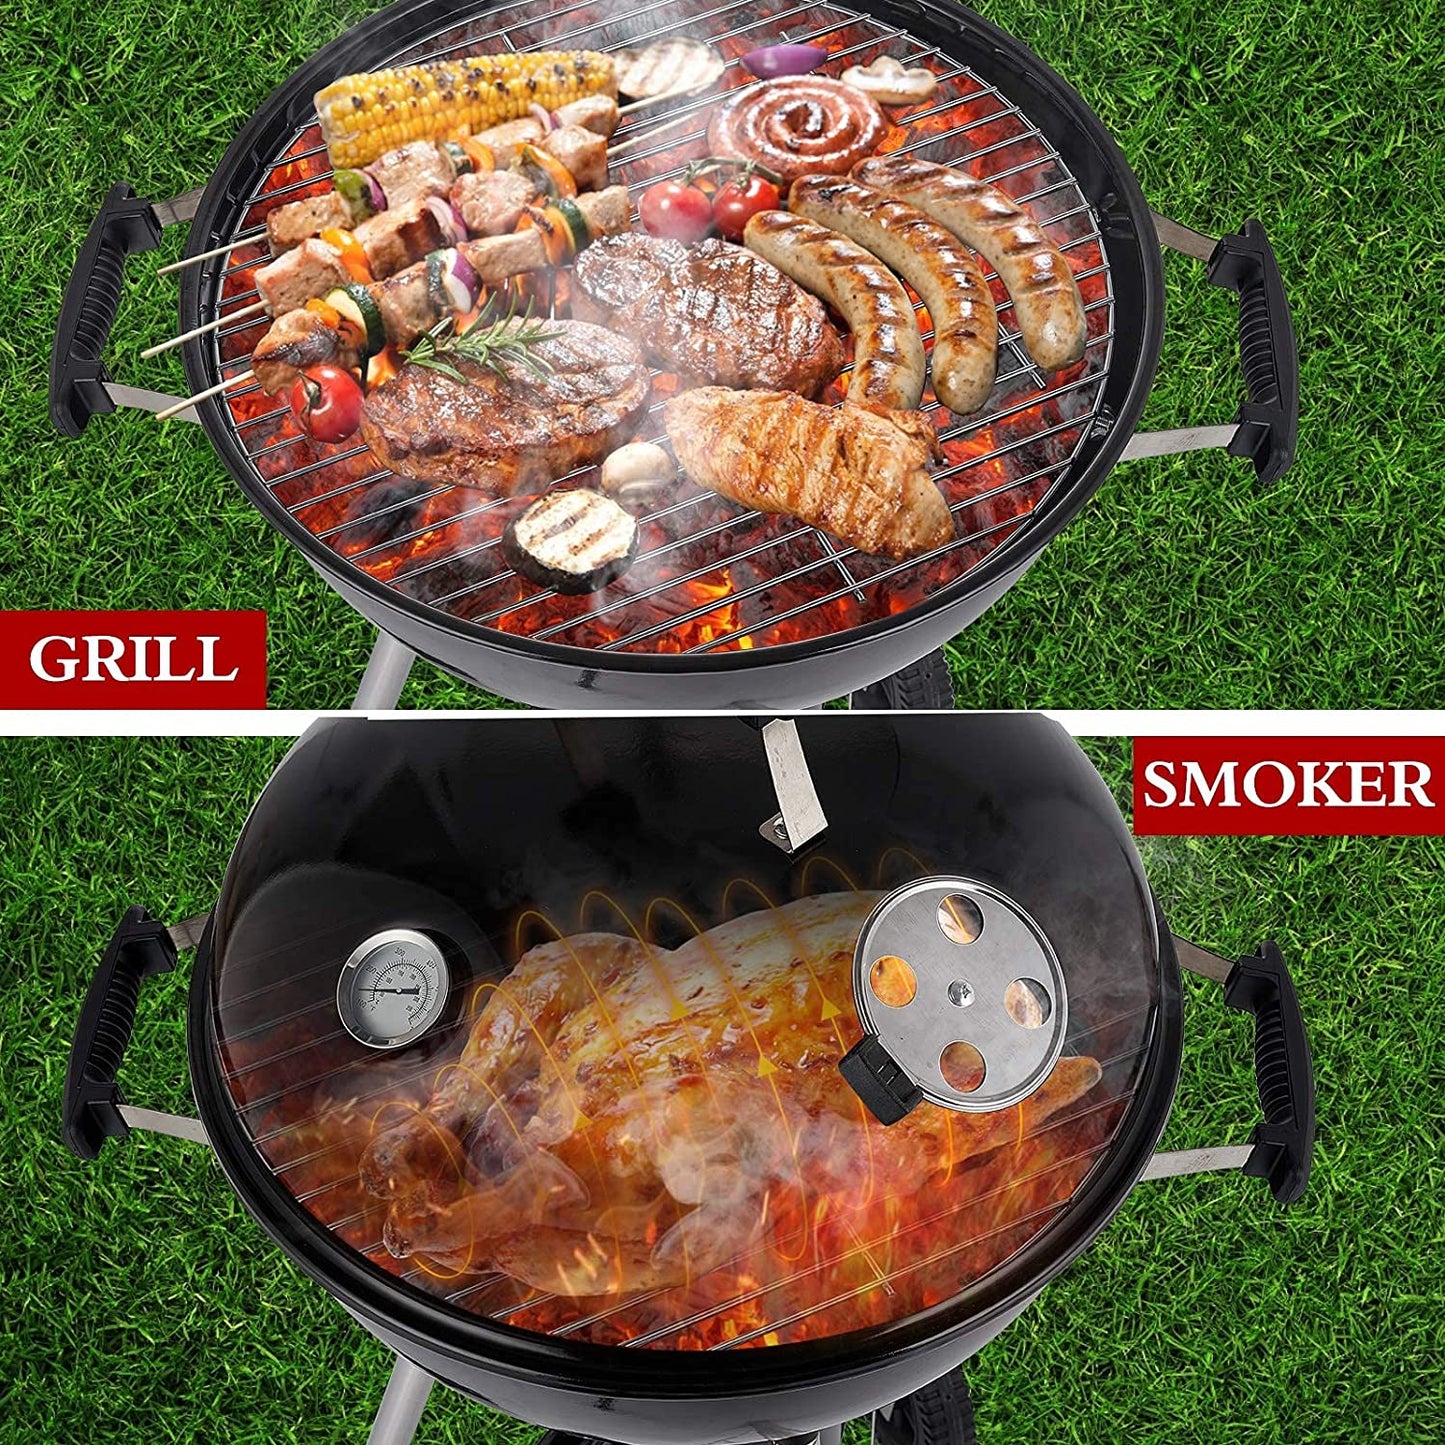 17" Round Portable BBQ Charcoal Grill Set (Free Gifts: Grilling Skillet & 3 Spices)